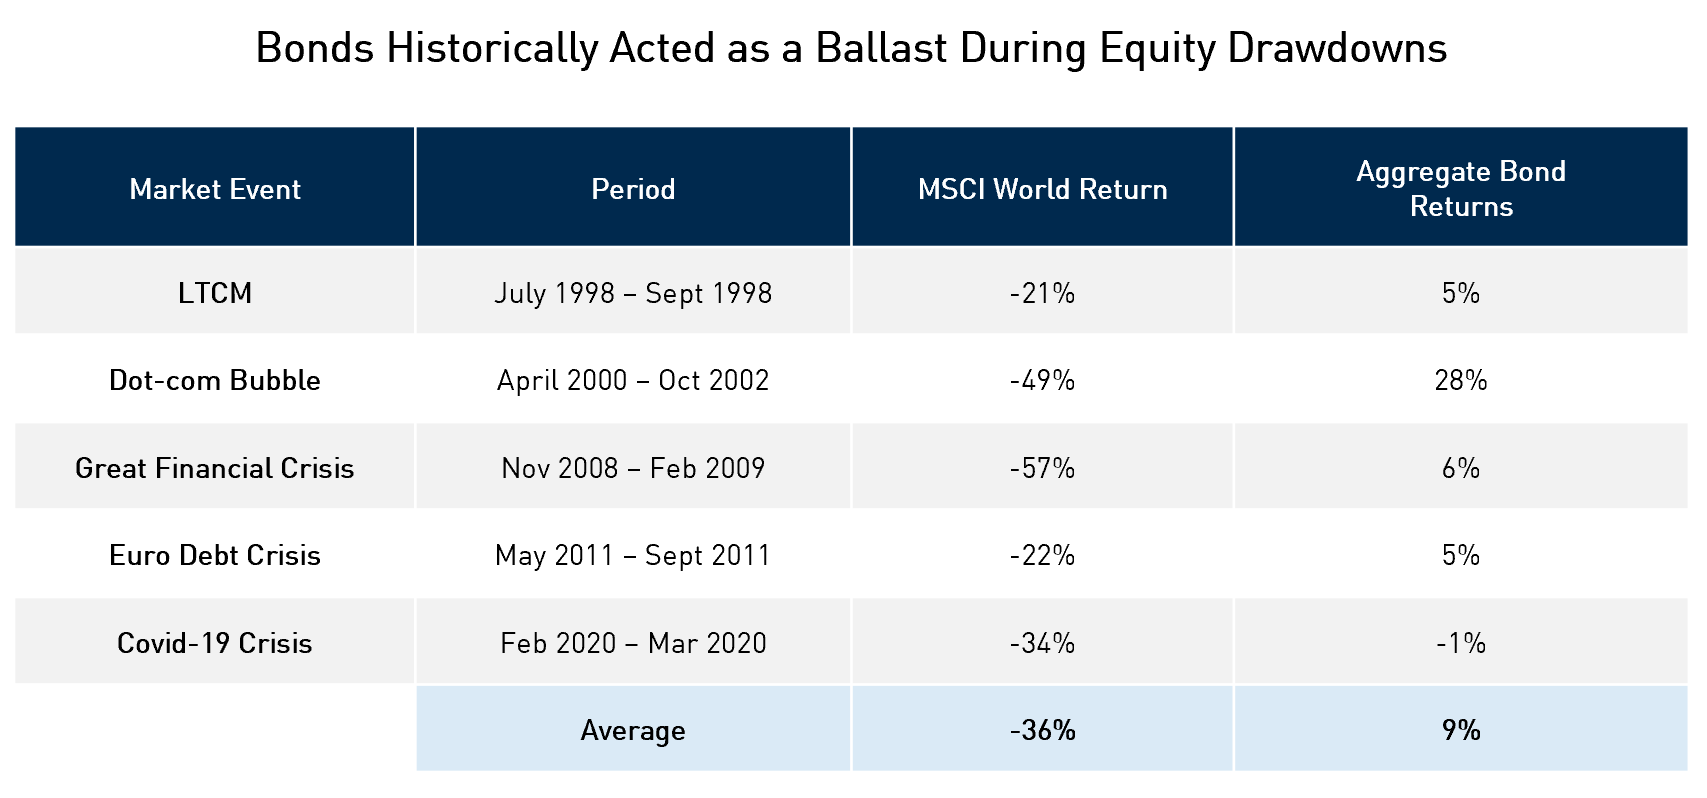 Table showing that bonds historically acted as a ballast during equity drawdowns